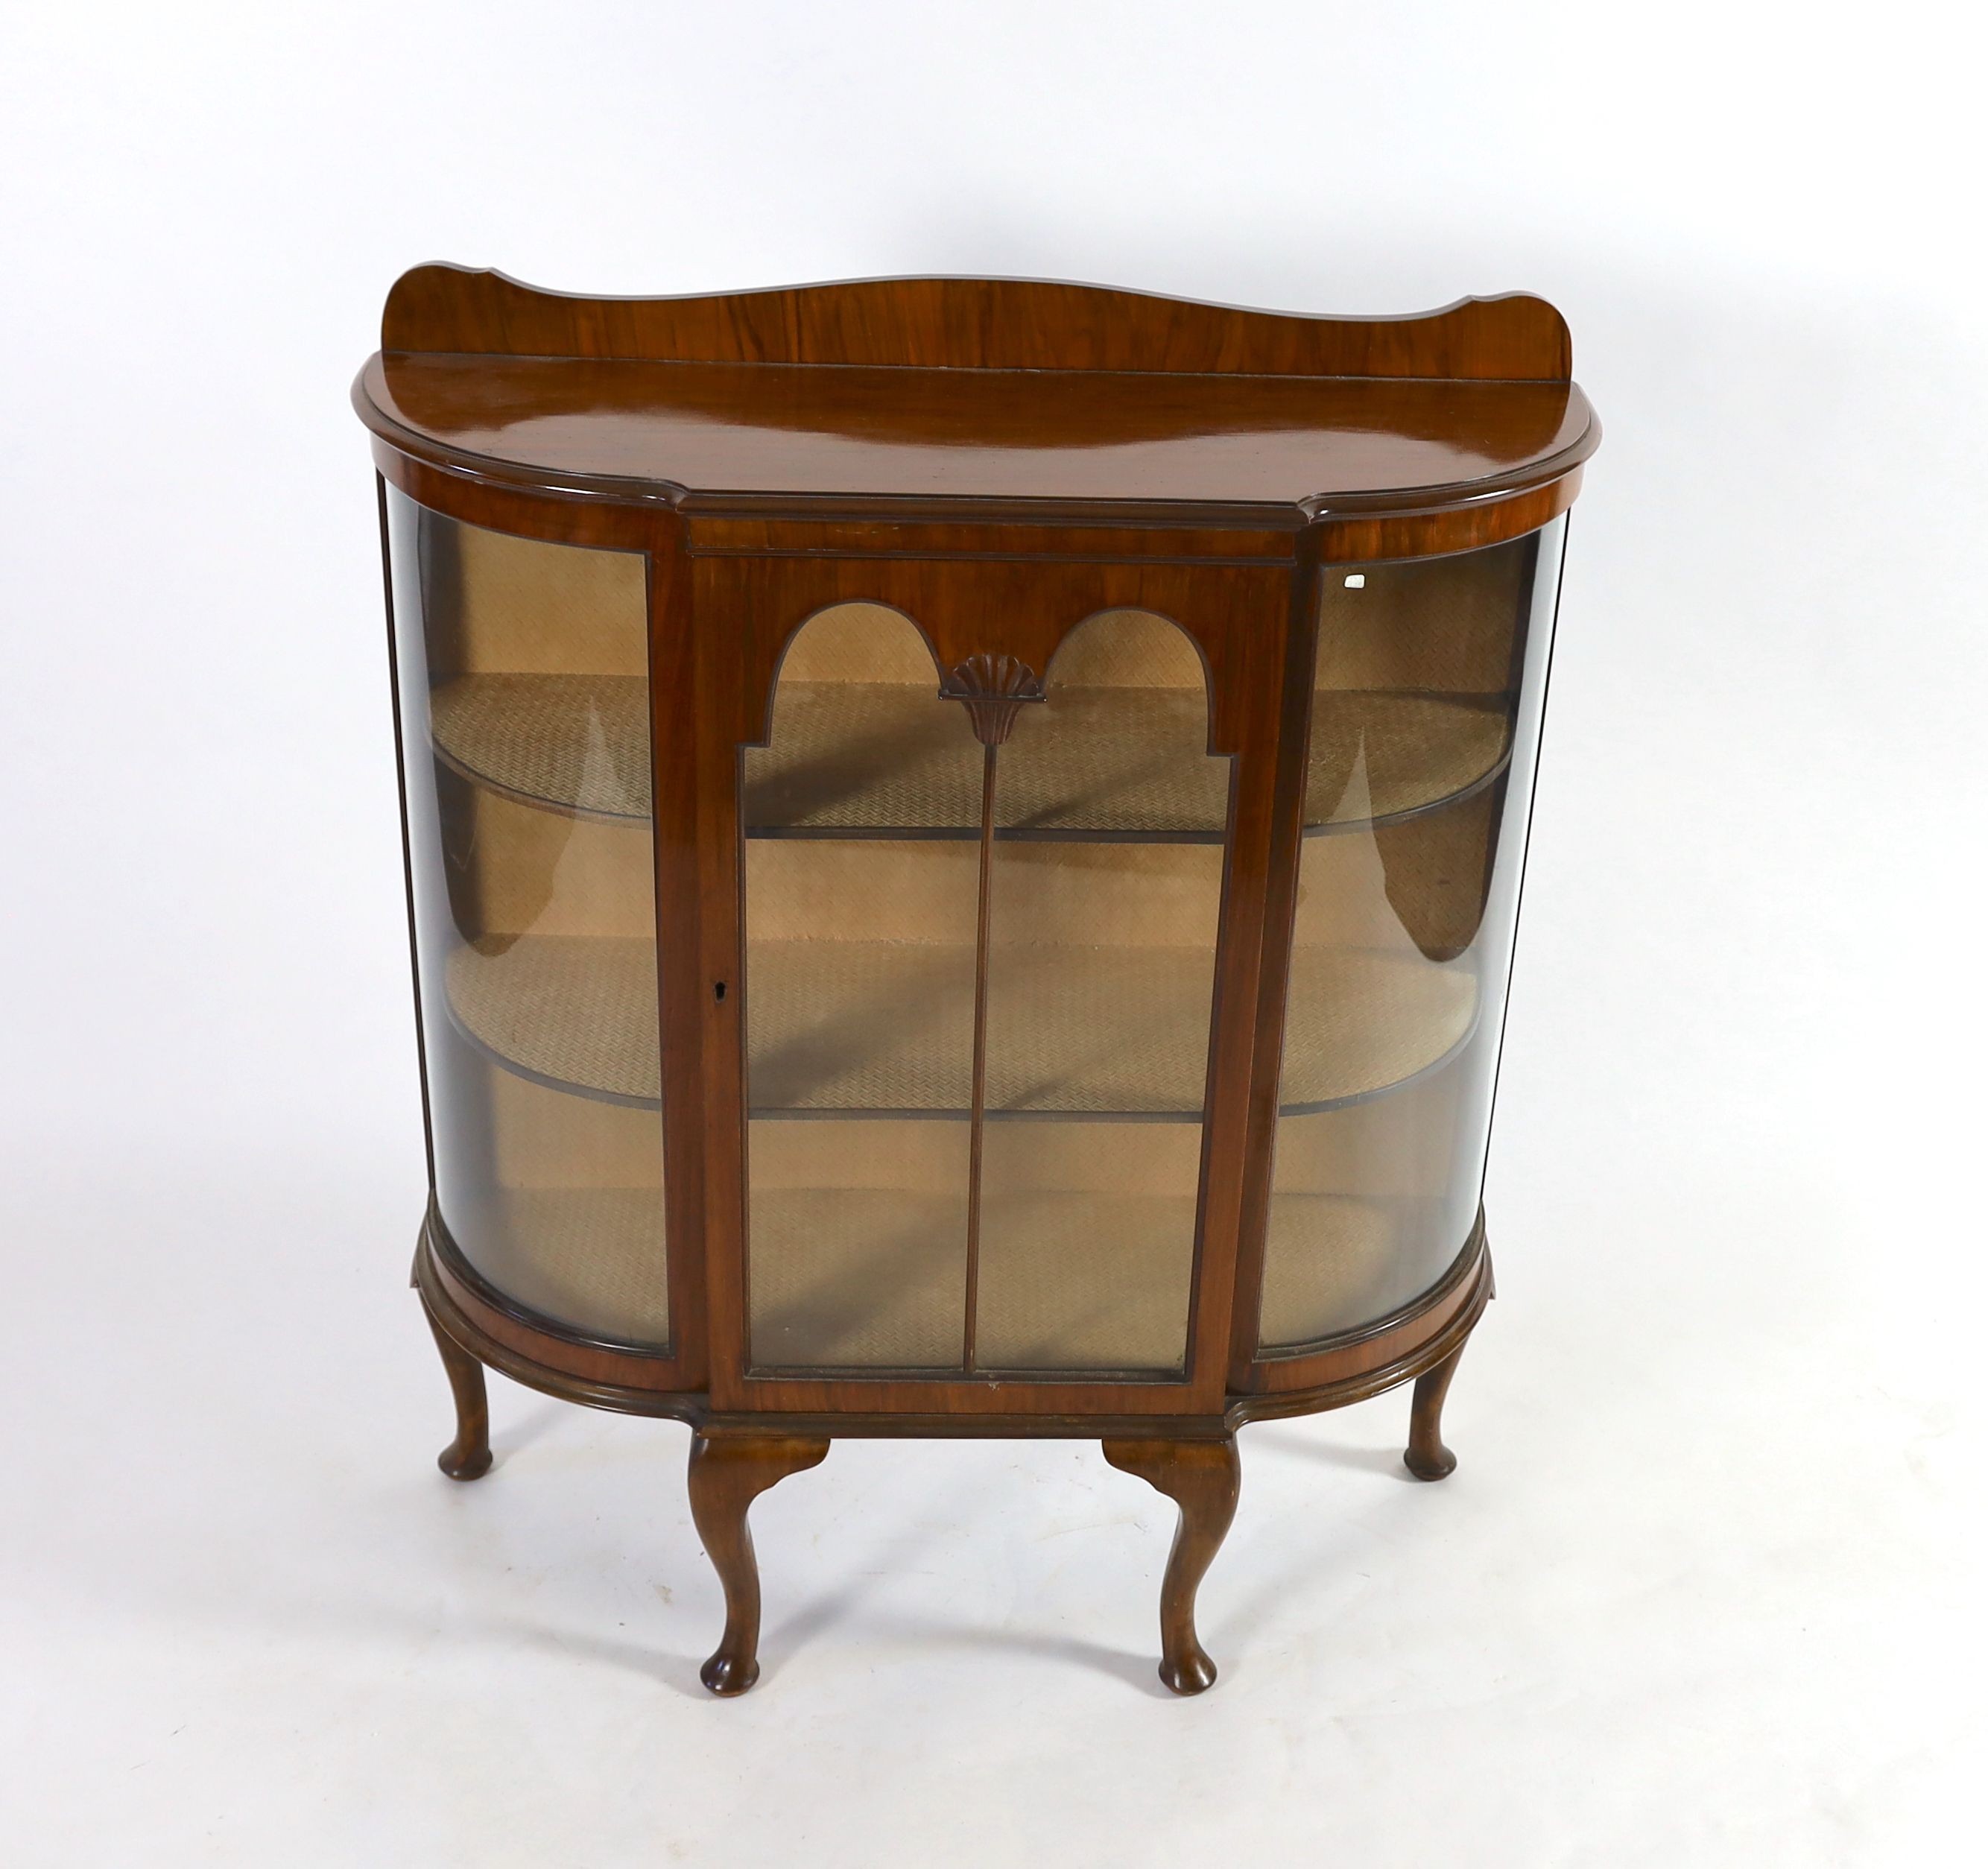 An early 20th century walnut bowfront display cabinet, width 106cm depth 38cm height 126cm